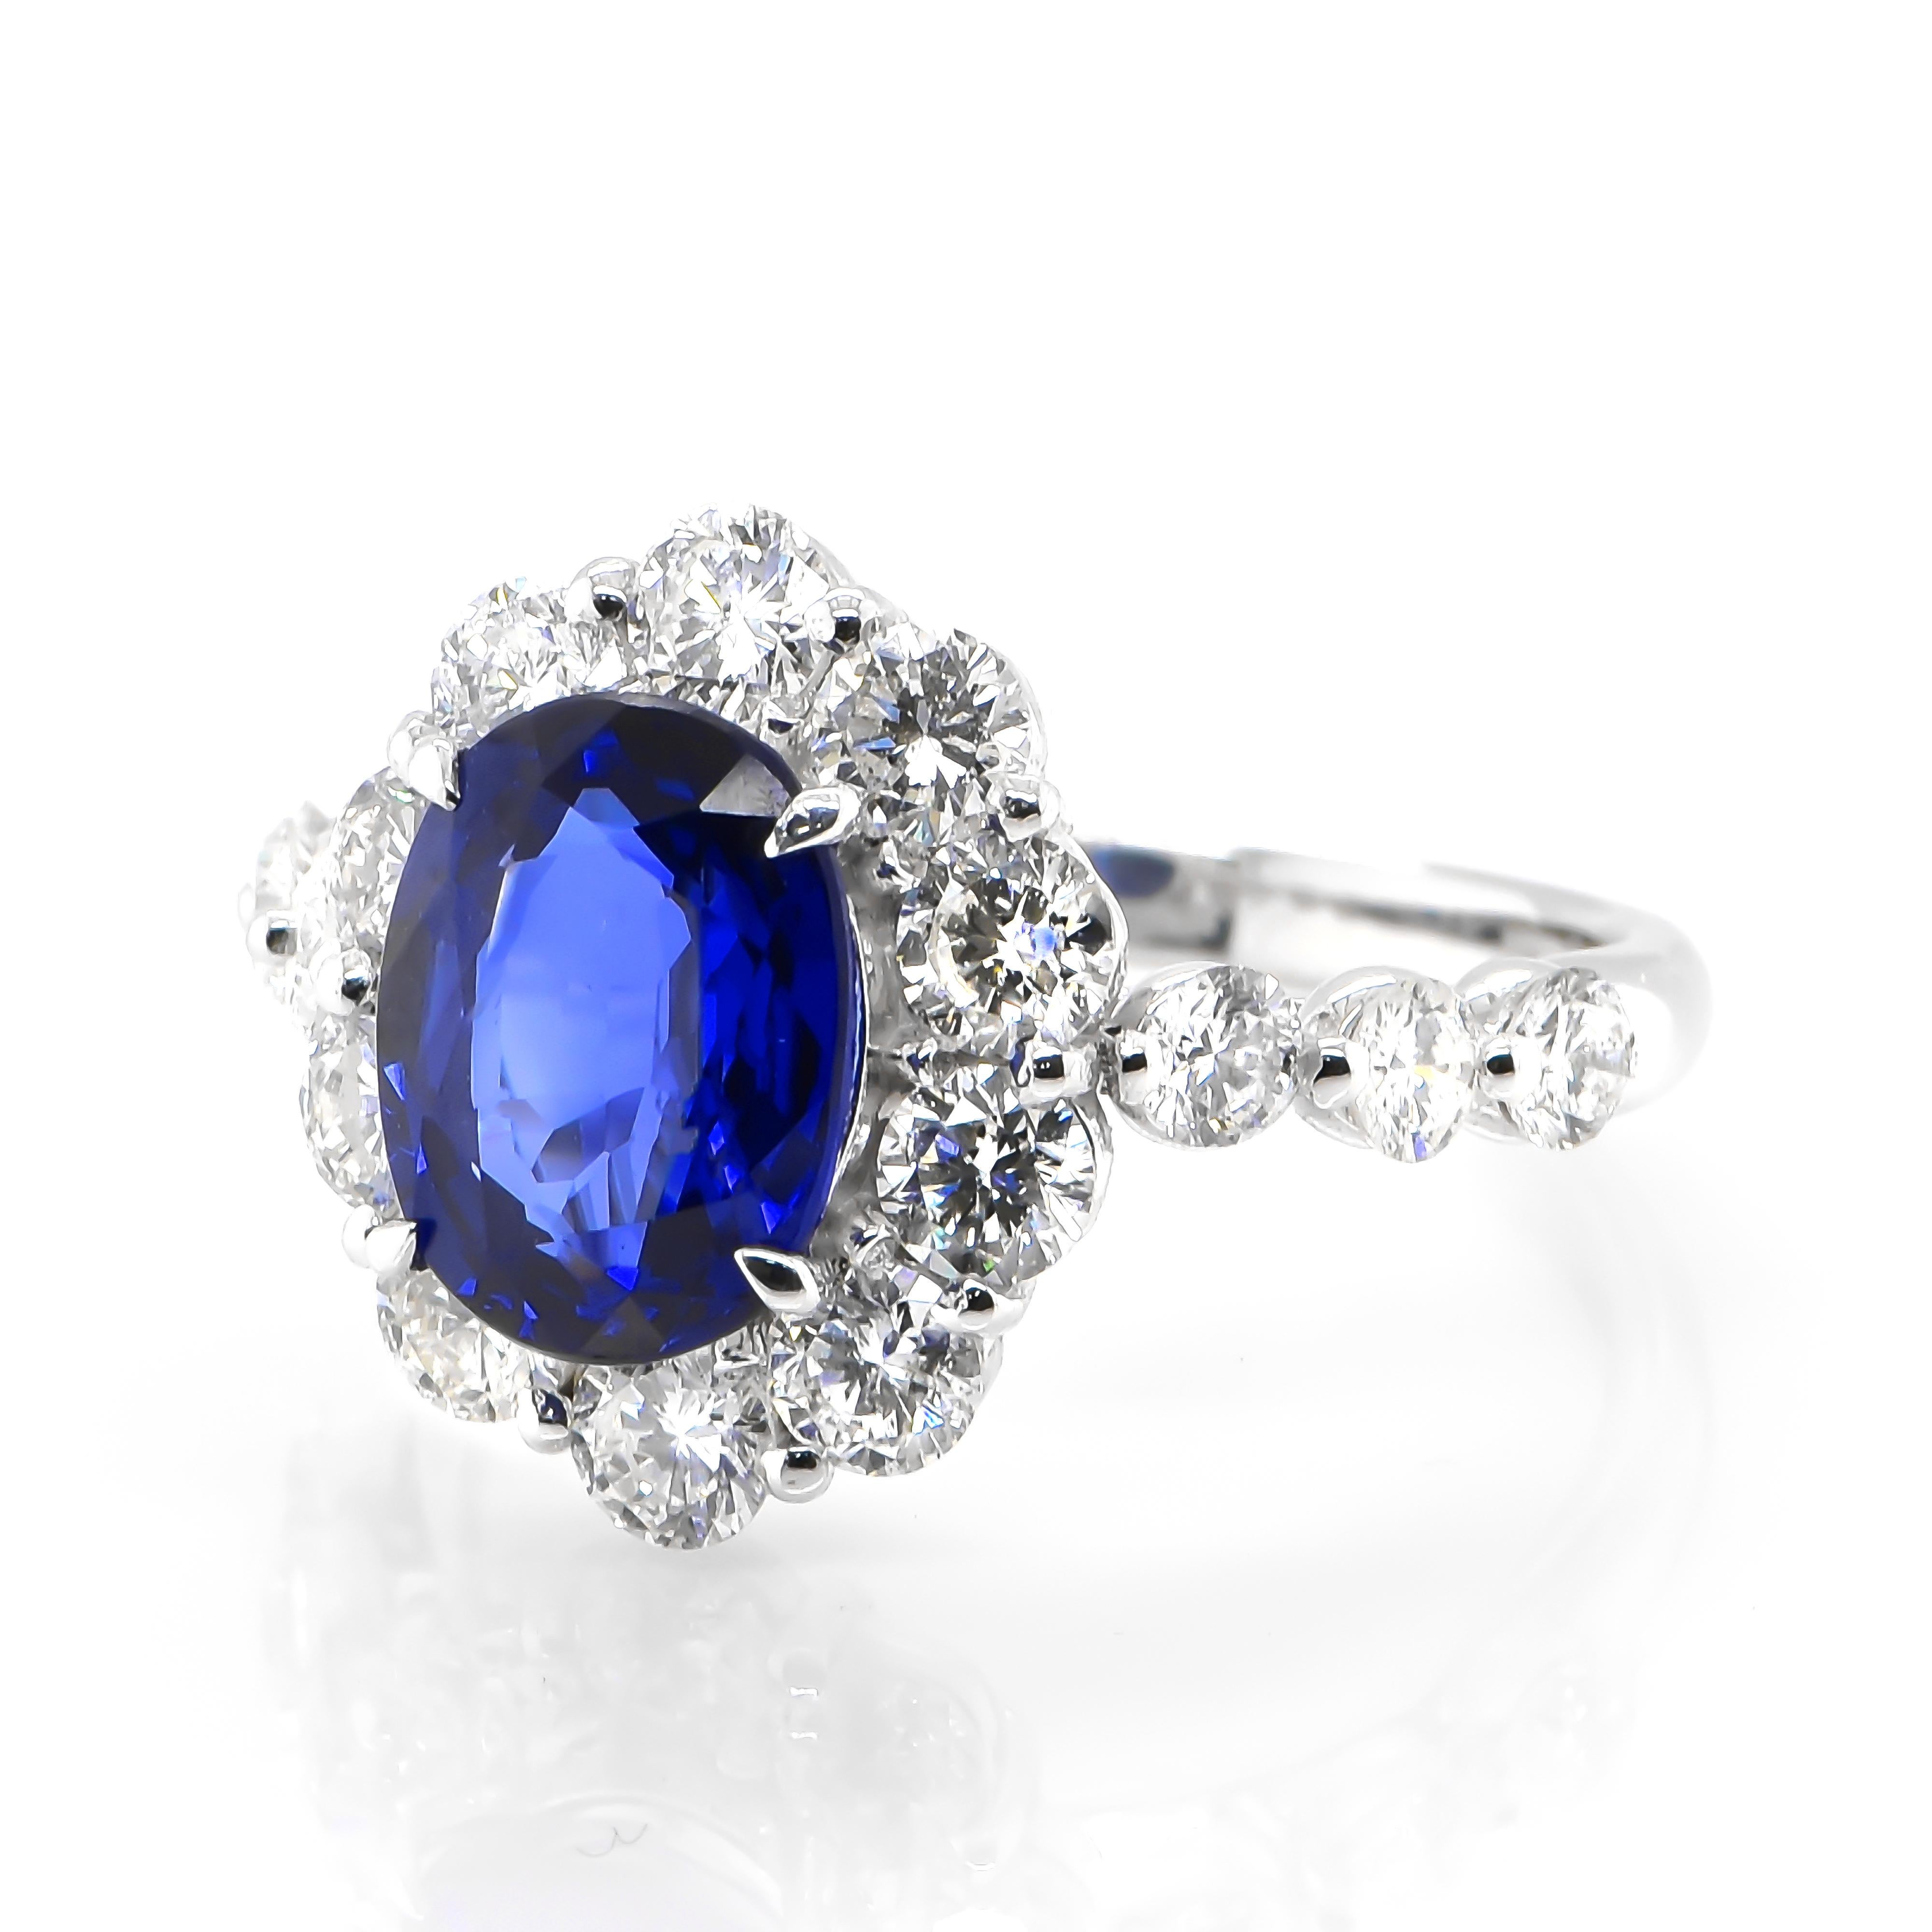 Modern 2.95 Carat Natural Royal Blue Sapphire and Diamond Halo Ring Made in Platinum For Sale